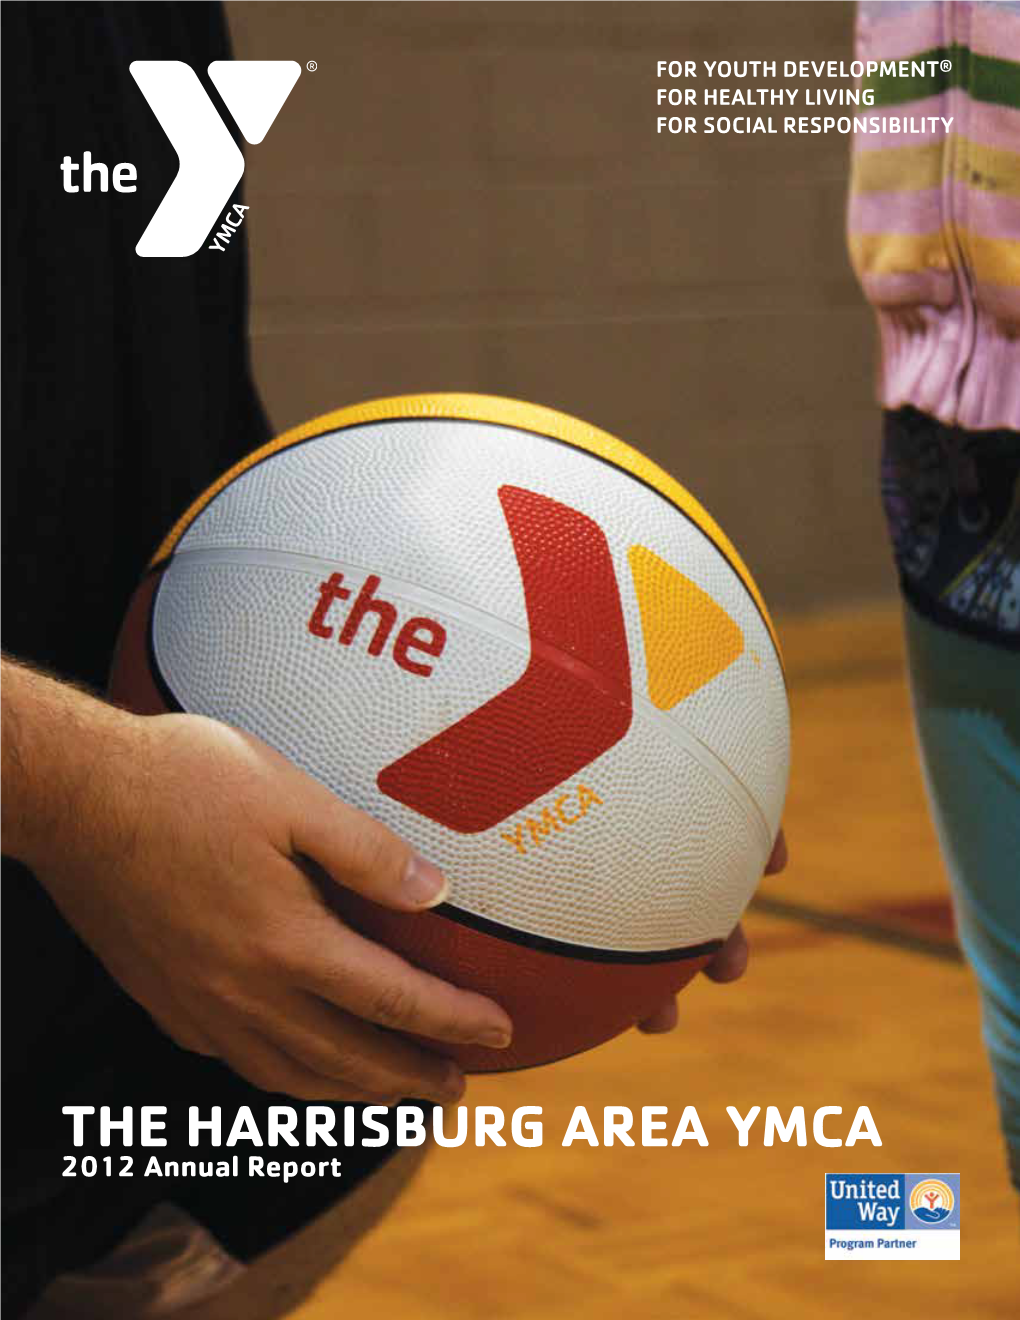 THE HARRISBURG AREA YMCA 2012 Annual Report a Place to Learn, Grow, Thrive